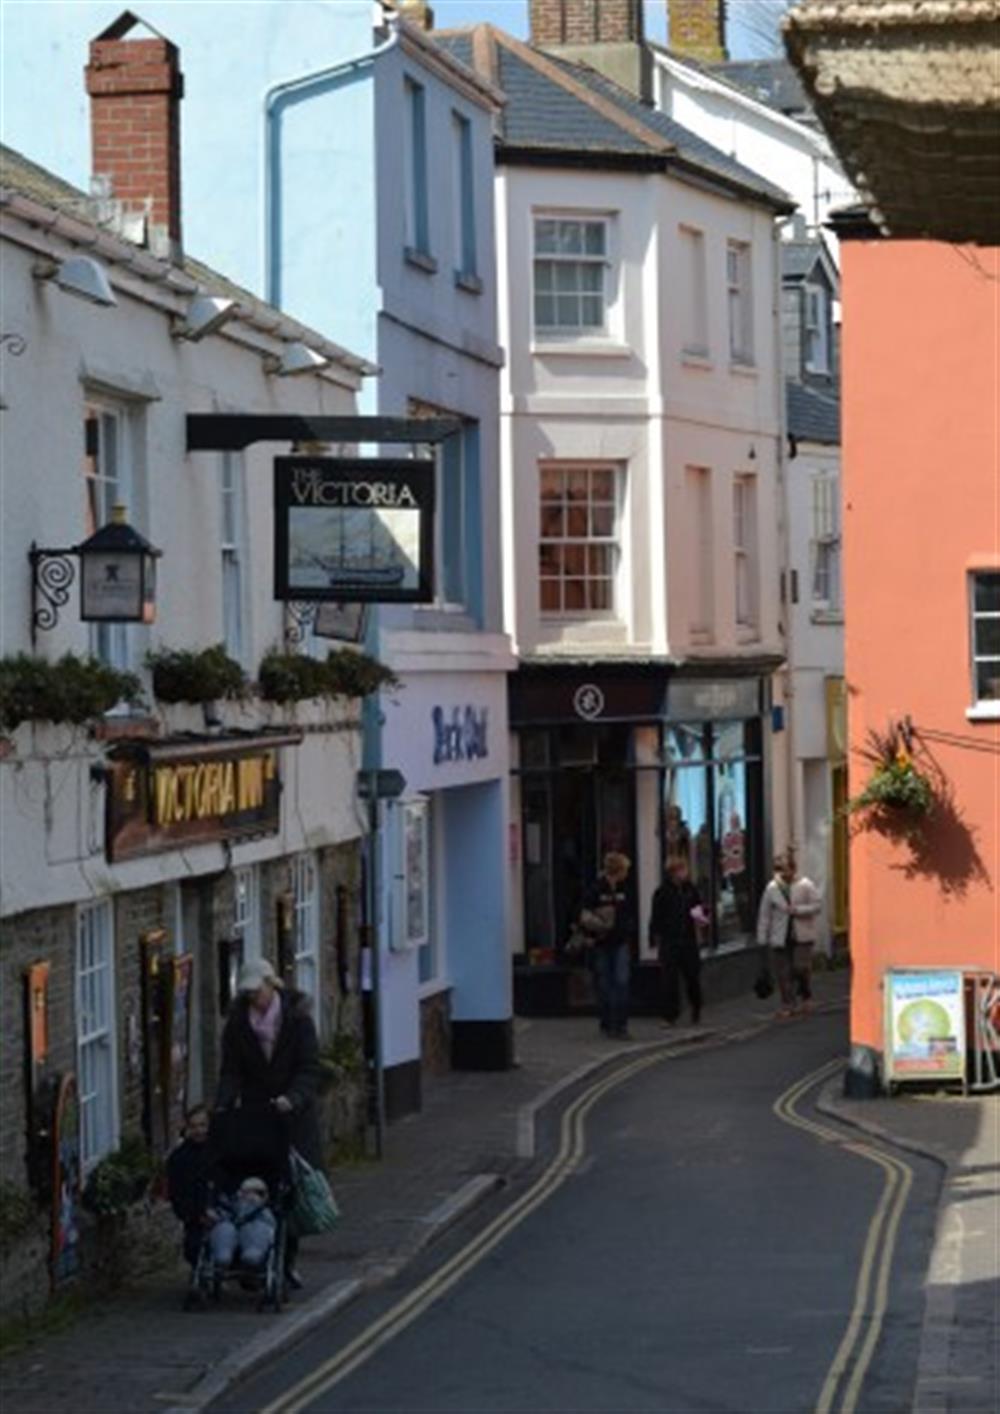 Fore Street with a number of pubs and restaurants is just a short walk from the property  at Thelma in Salcombe